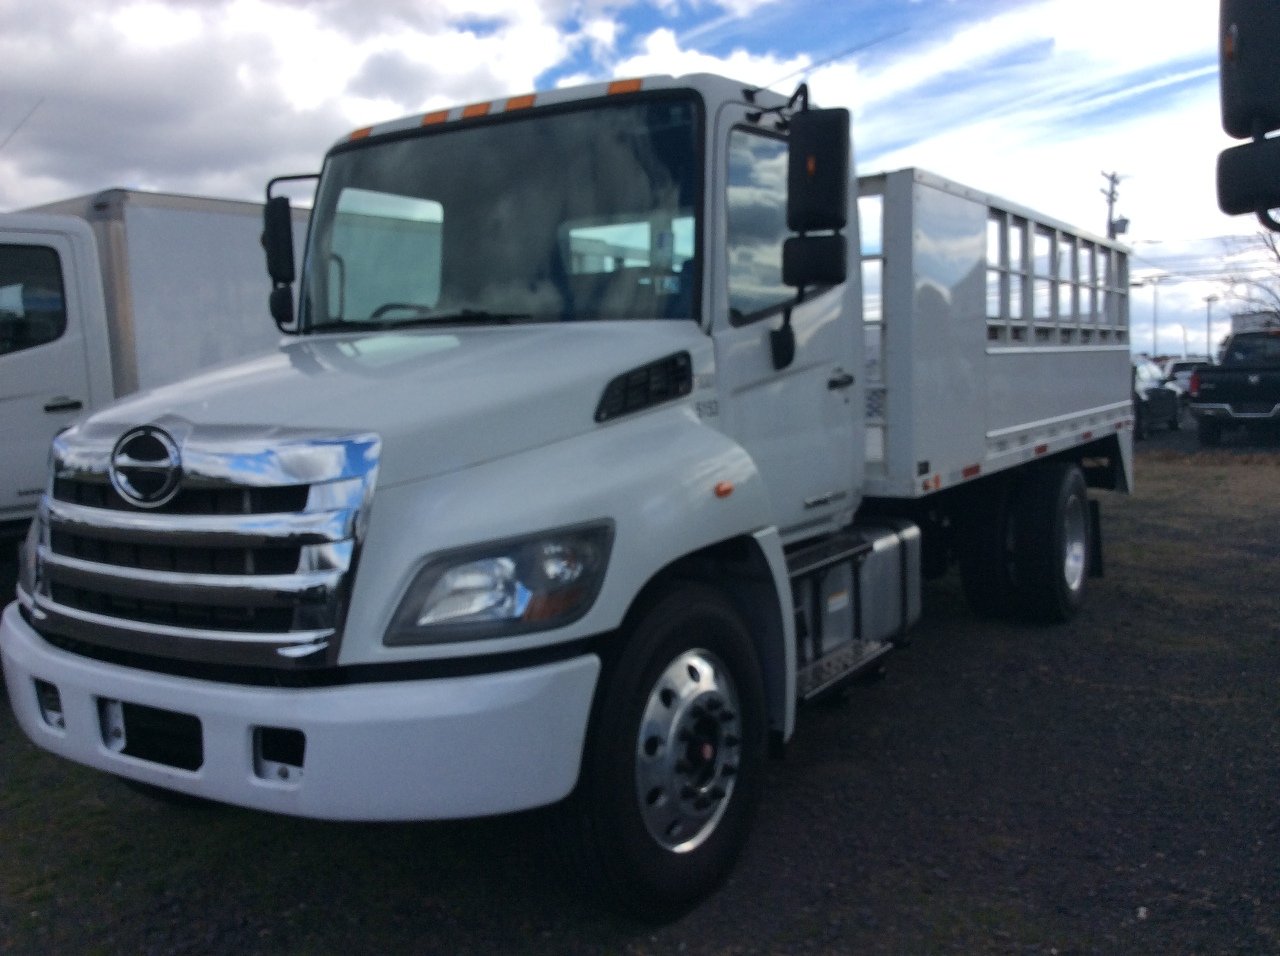 Used Truck Inventory - 1001857 01 2 - 76